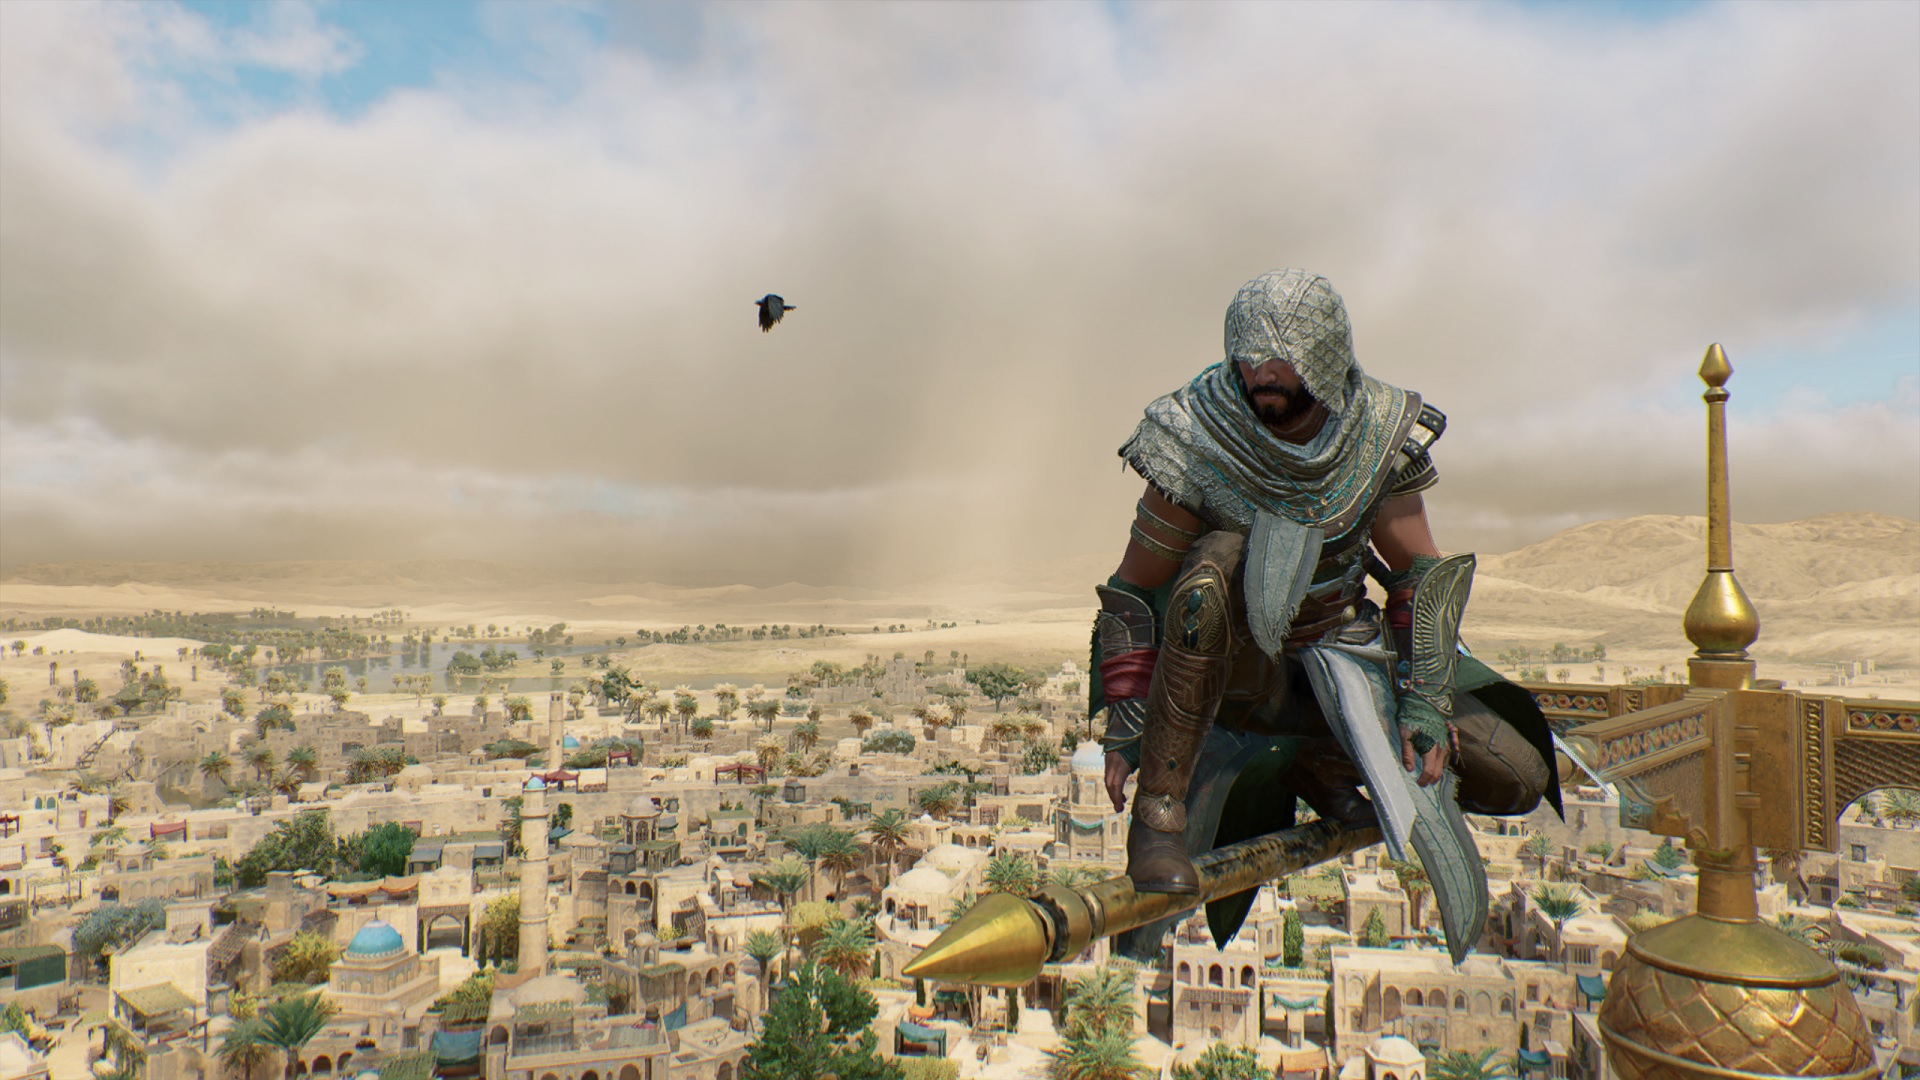 Assassin's Creed is now 10 years old and here are the best mods